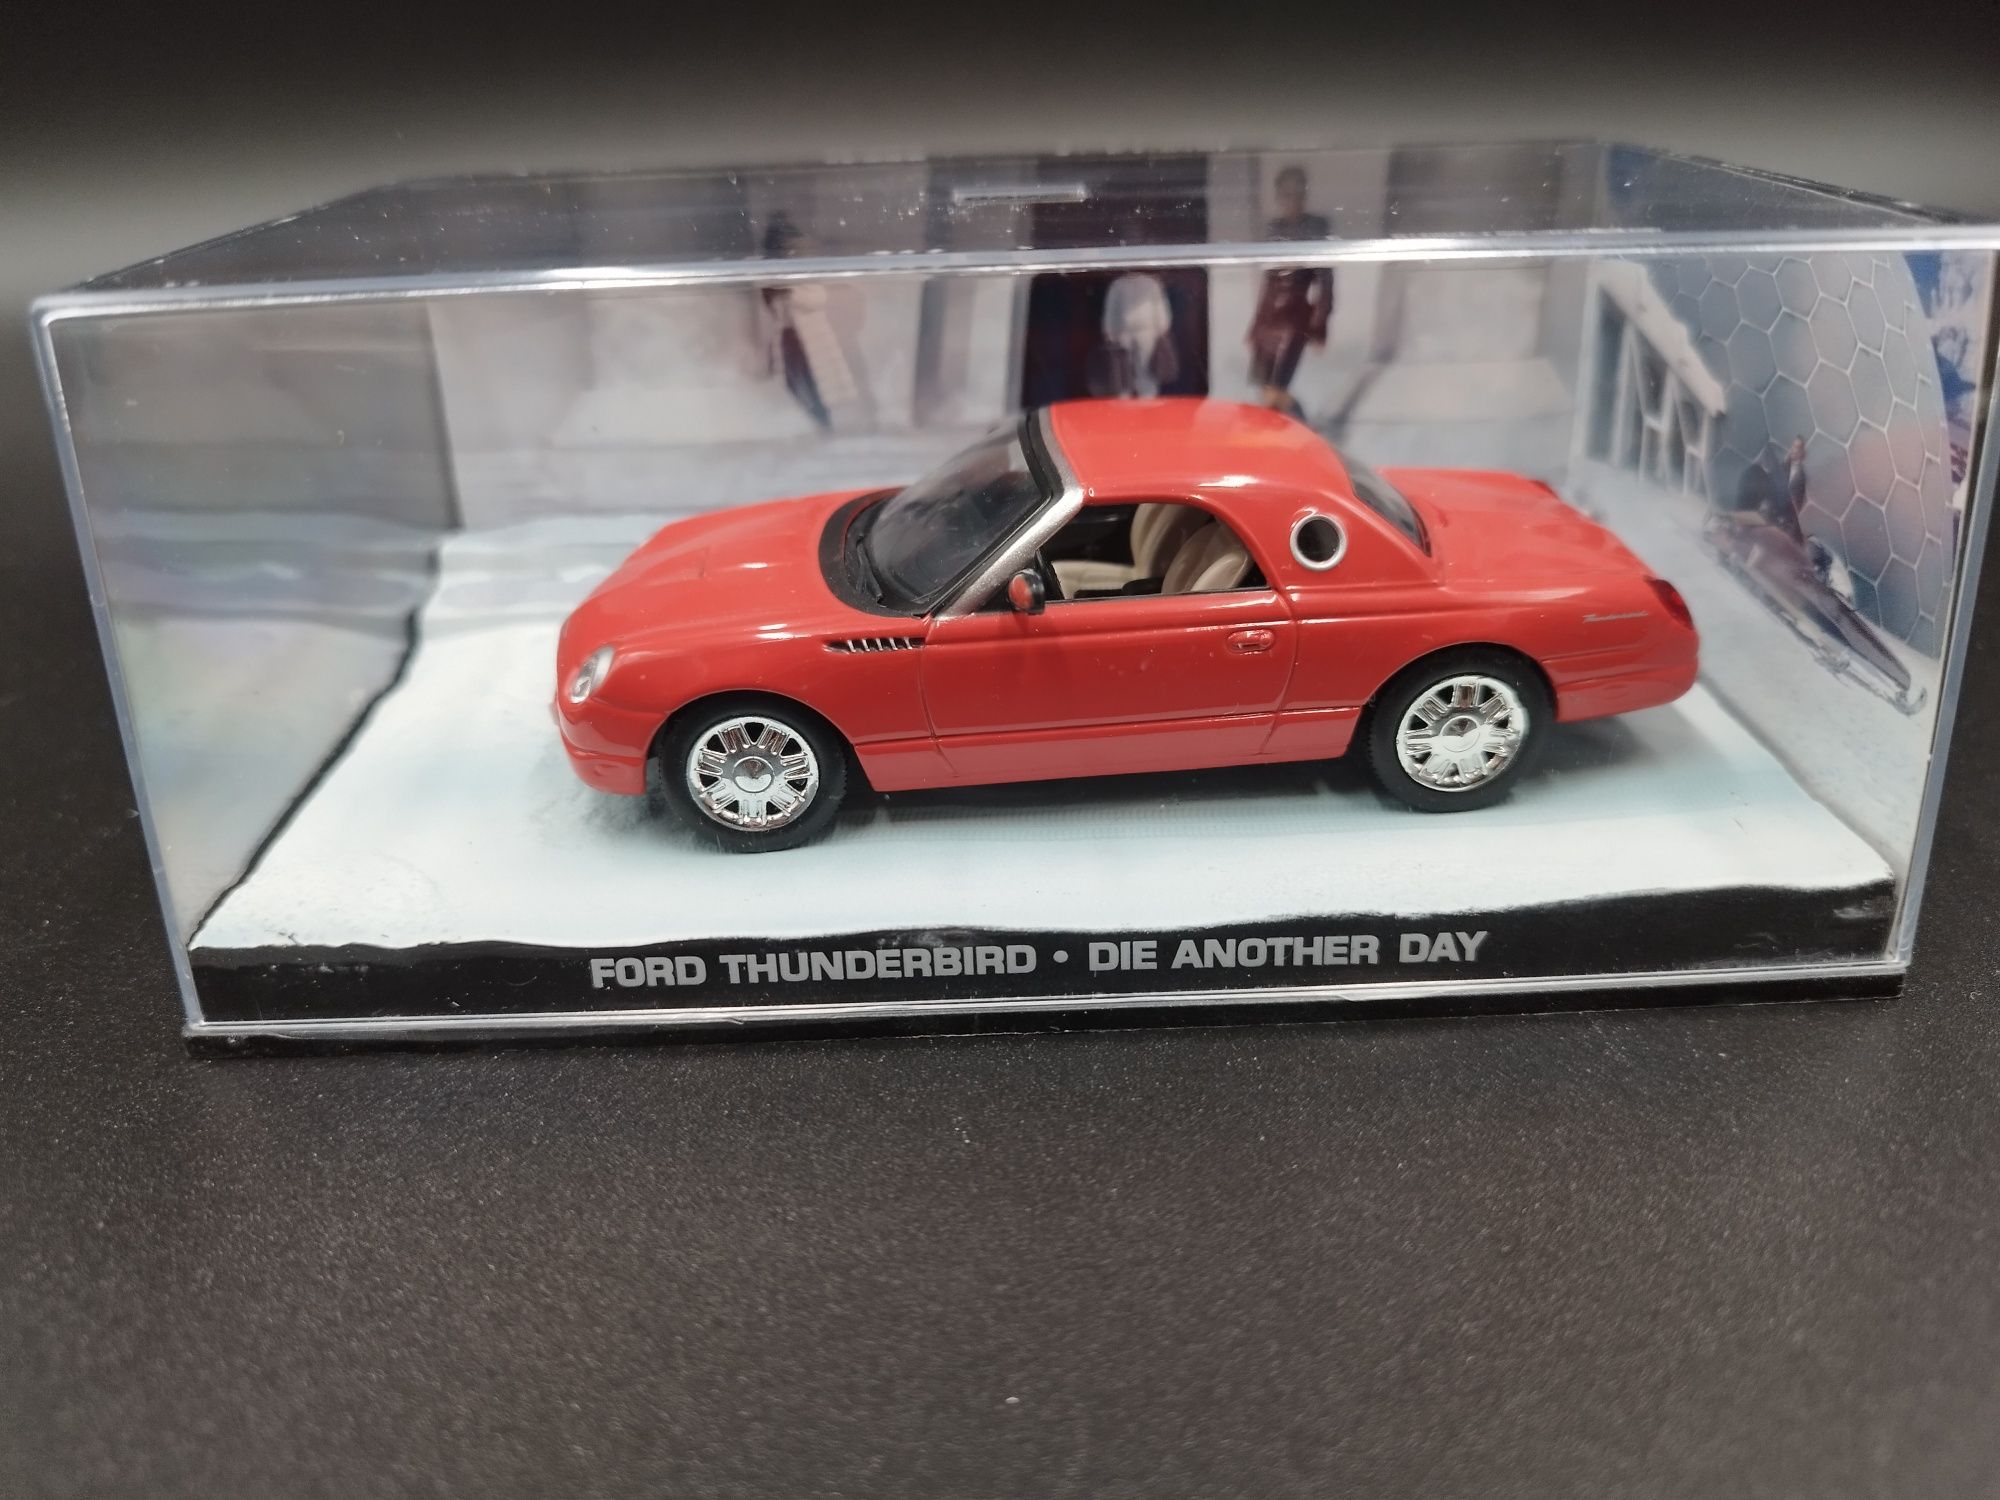 1:43 Altaya Ford Thunderbird 007 James Bond Die Another Day model